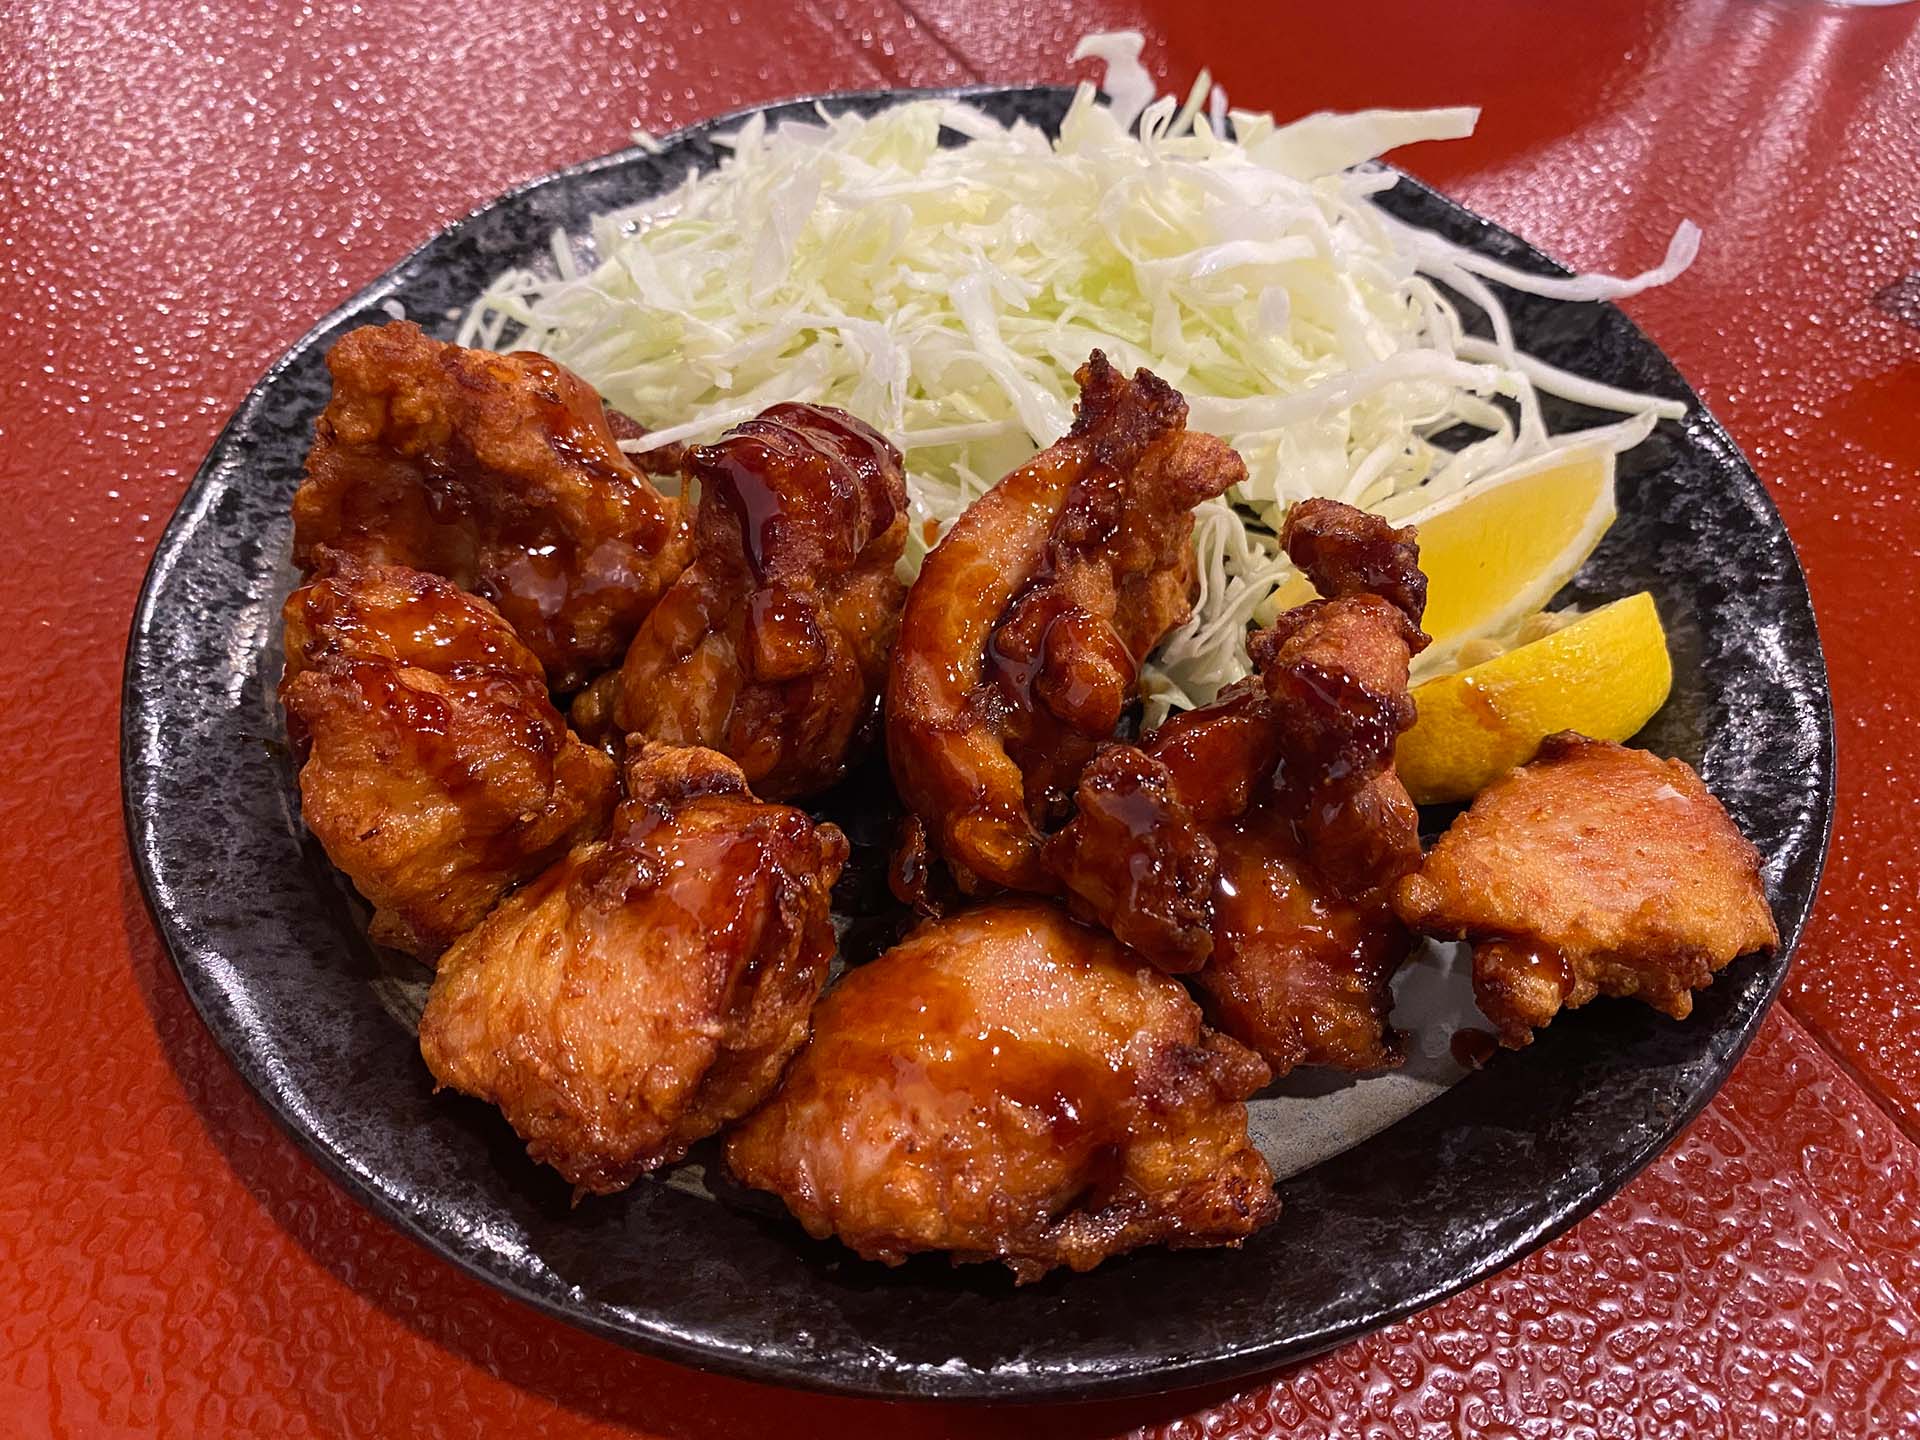 A plate of Hawaiian-style mochiko fried chicken with shredded cabbage and lemon wedges on the side.